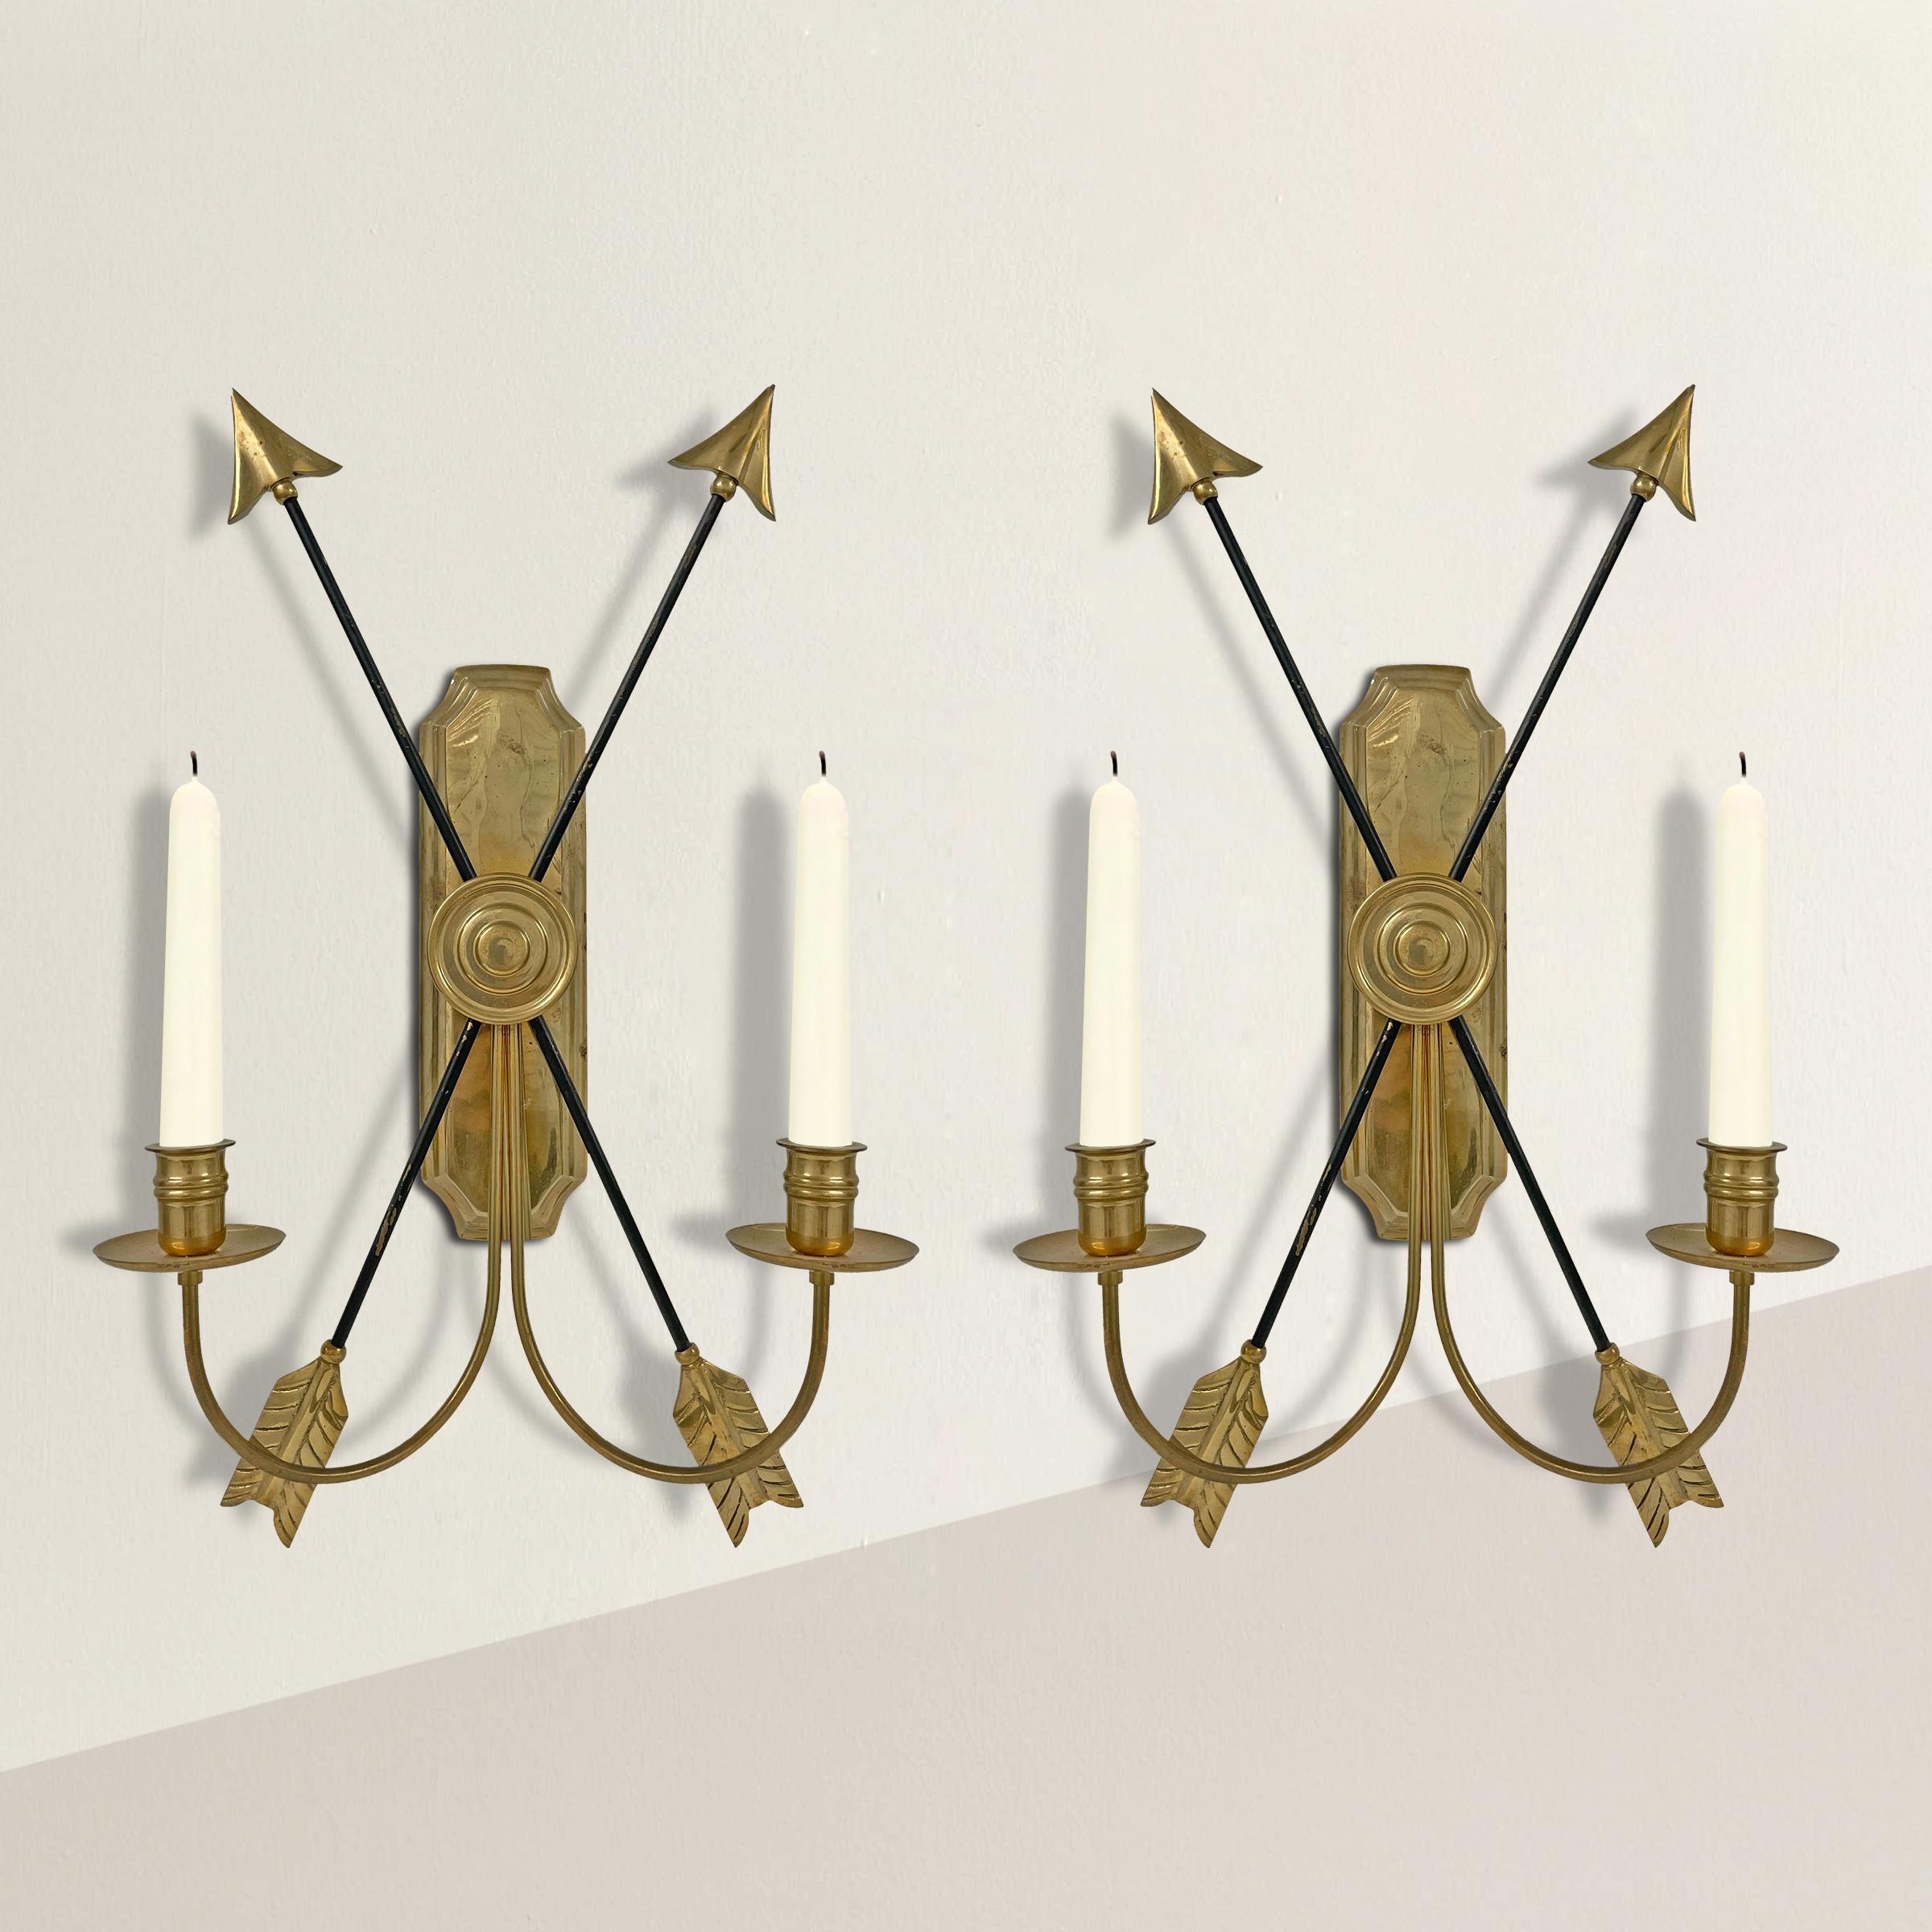 A chic pair of mid-20th century Empire-style brass candle sconces, each with two arms and two crossed arrows. Perfect in your entry flanking a mirror, or down the hallway in your home.